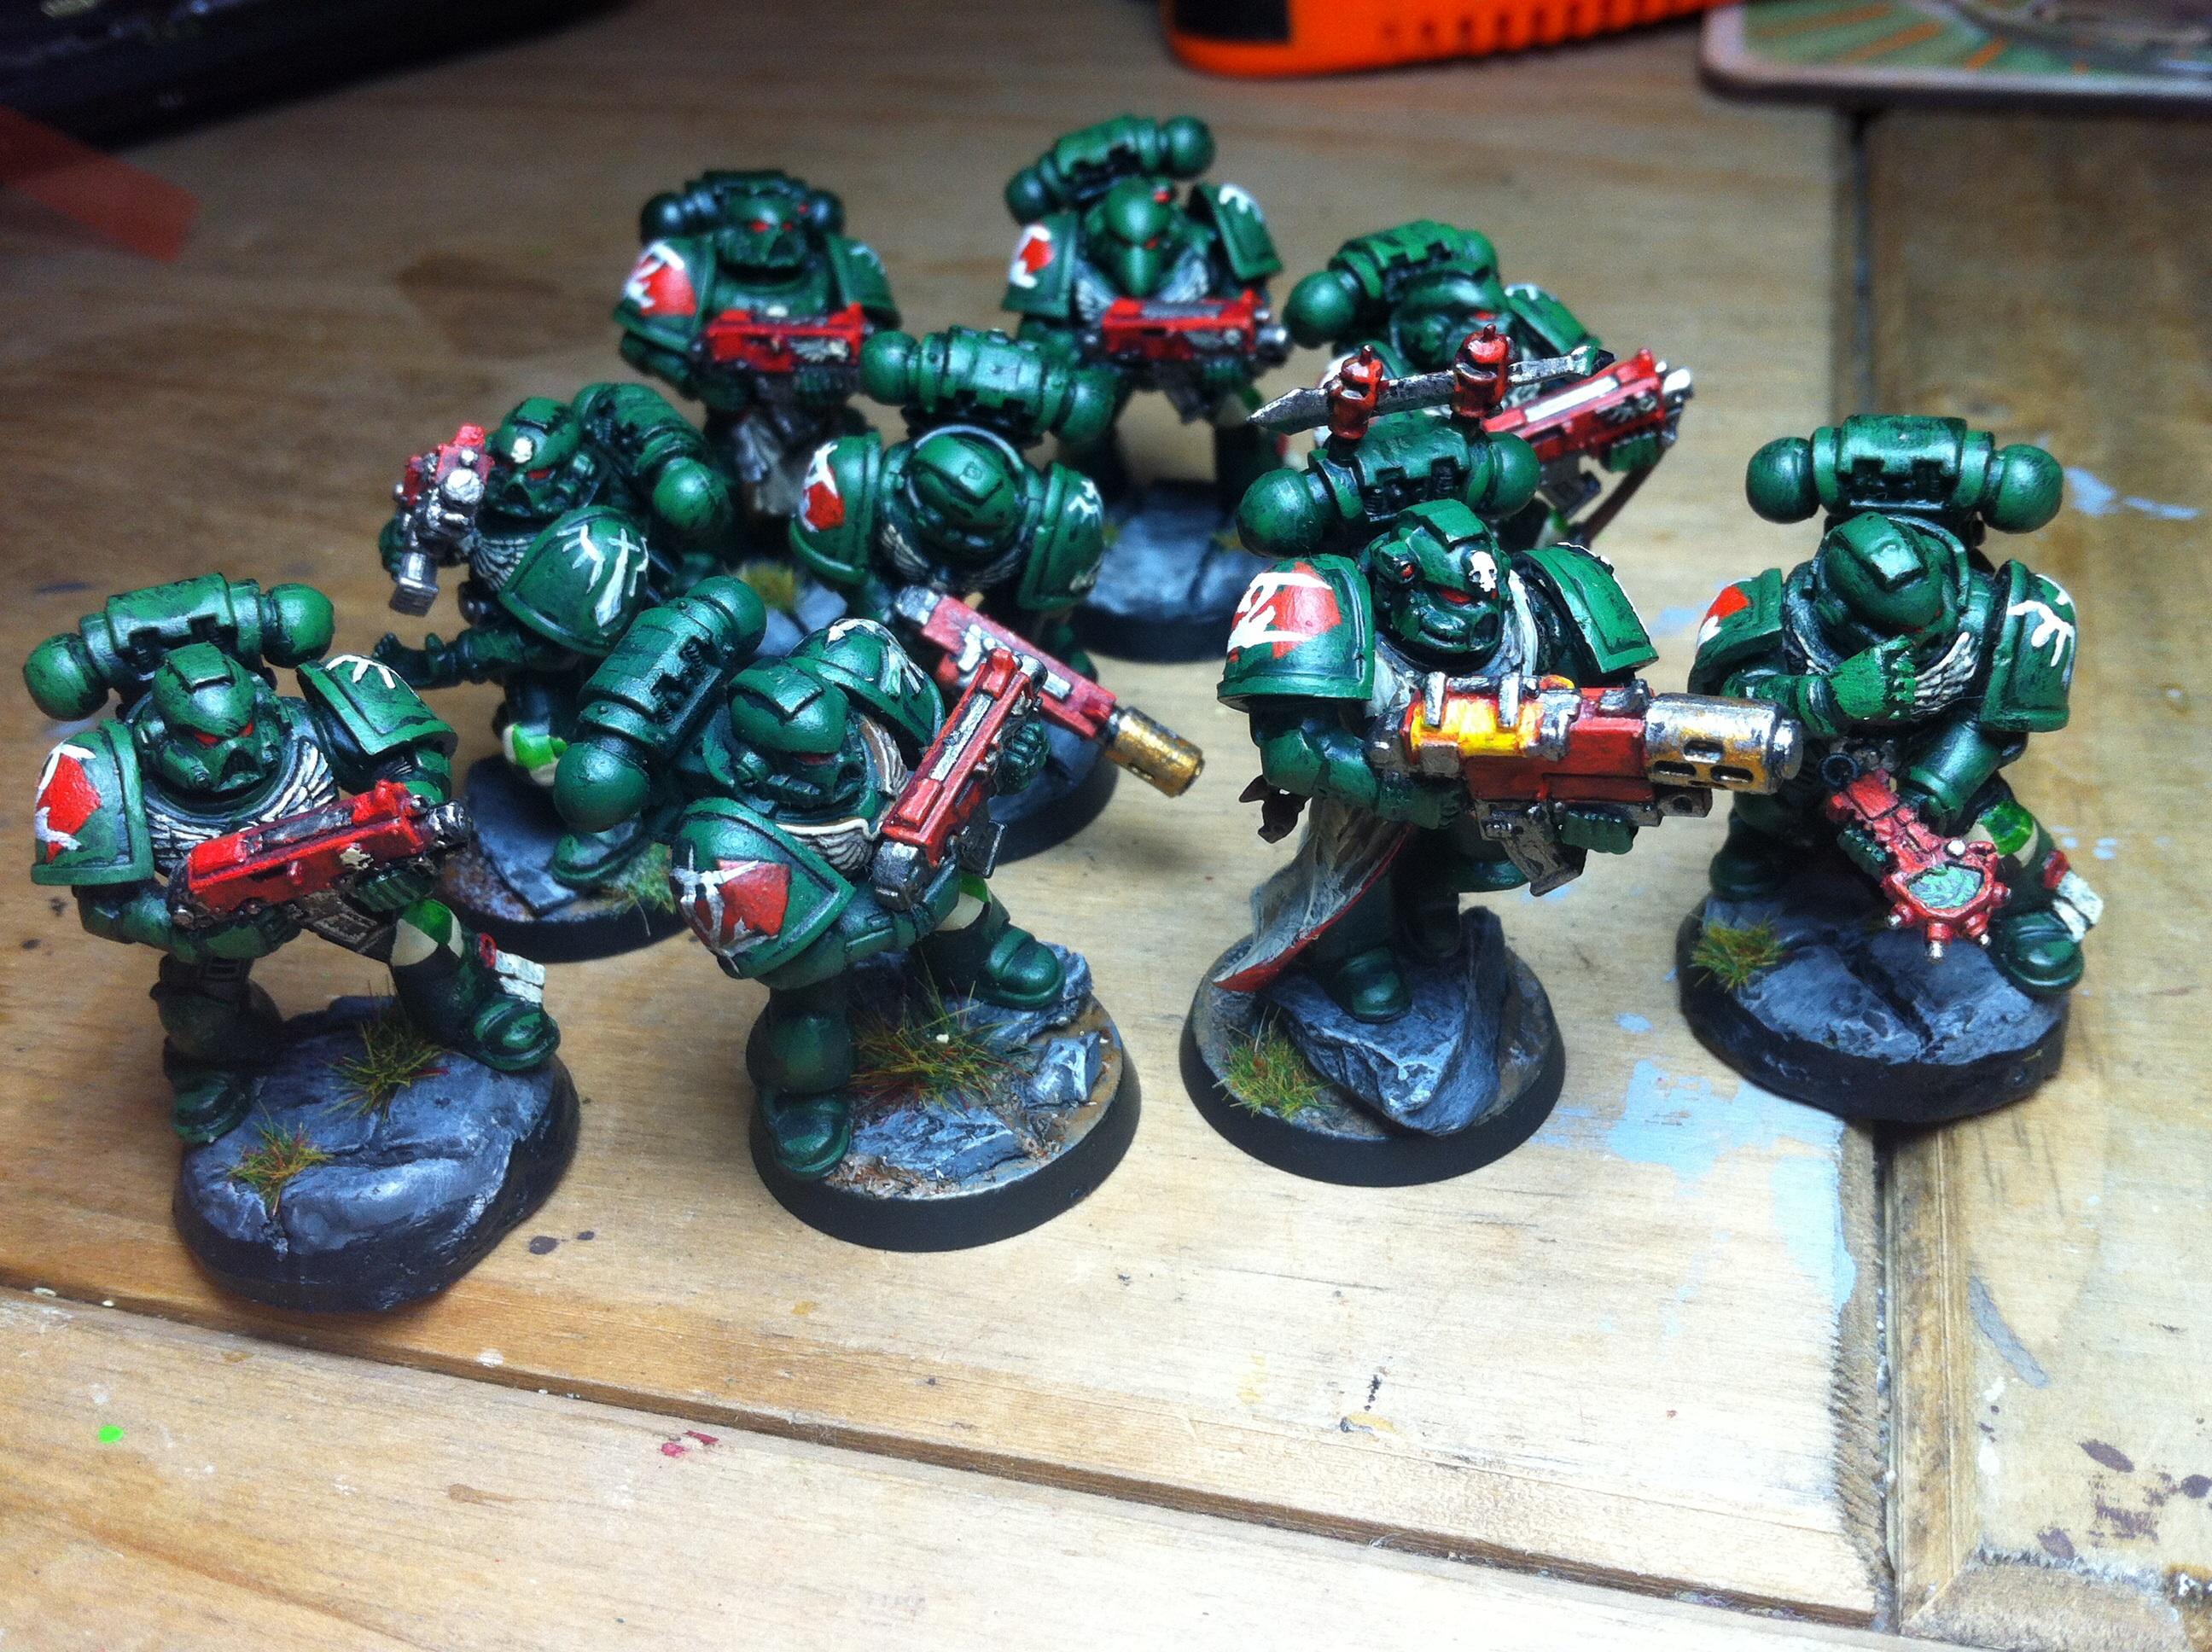 5th Company, Armor, Bolter, Dark Angels, Future, Green, Human, Imperial, Imperium, Imperium Of Man, Lbsf, Mankind, Painted, Power Armour, Sci Fi, Soldiers, Space, Space Marines, Tactical Squad, The Unforgiven, Troops, Warhammer 40,000, Warhammer Fantasy